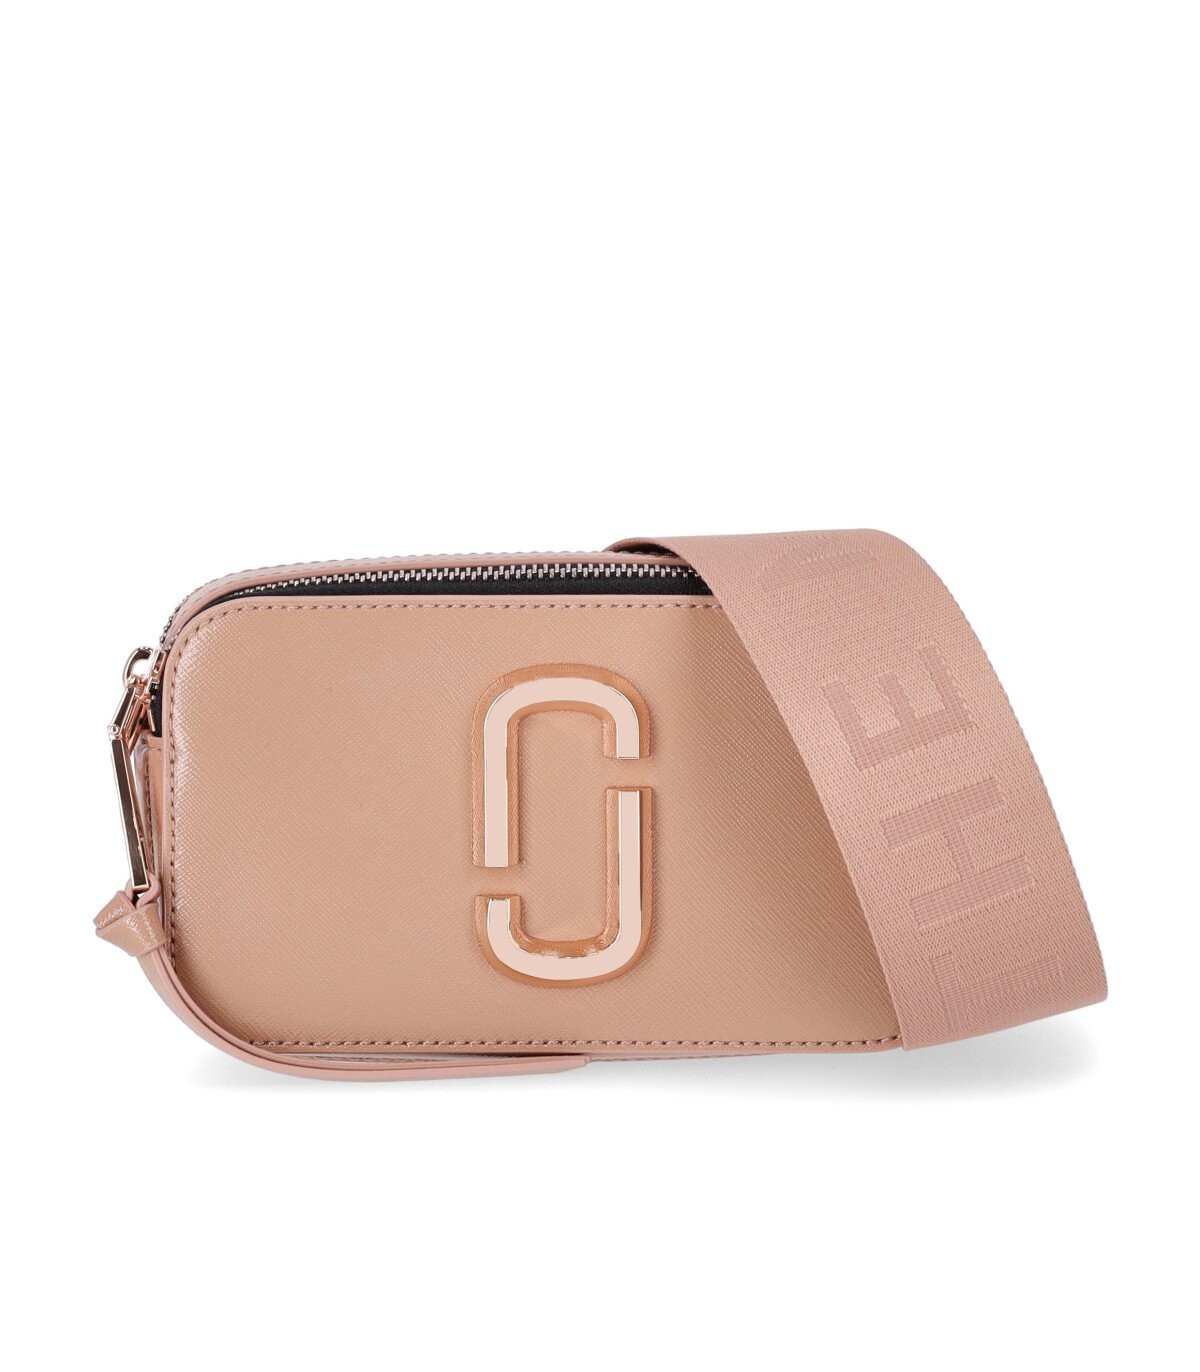 MARC JACOBS THE SNAPSHOT DTM SUNKISSED CROSSBODY BAG